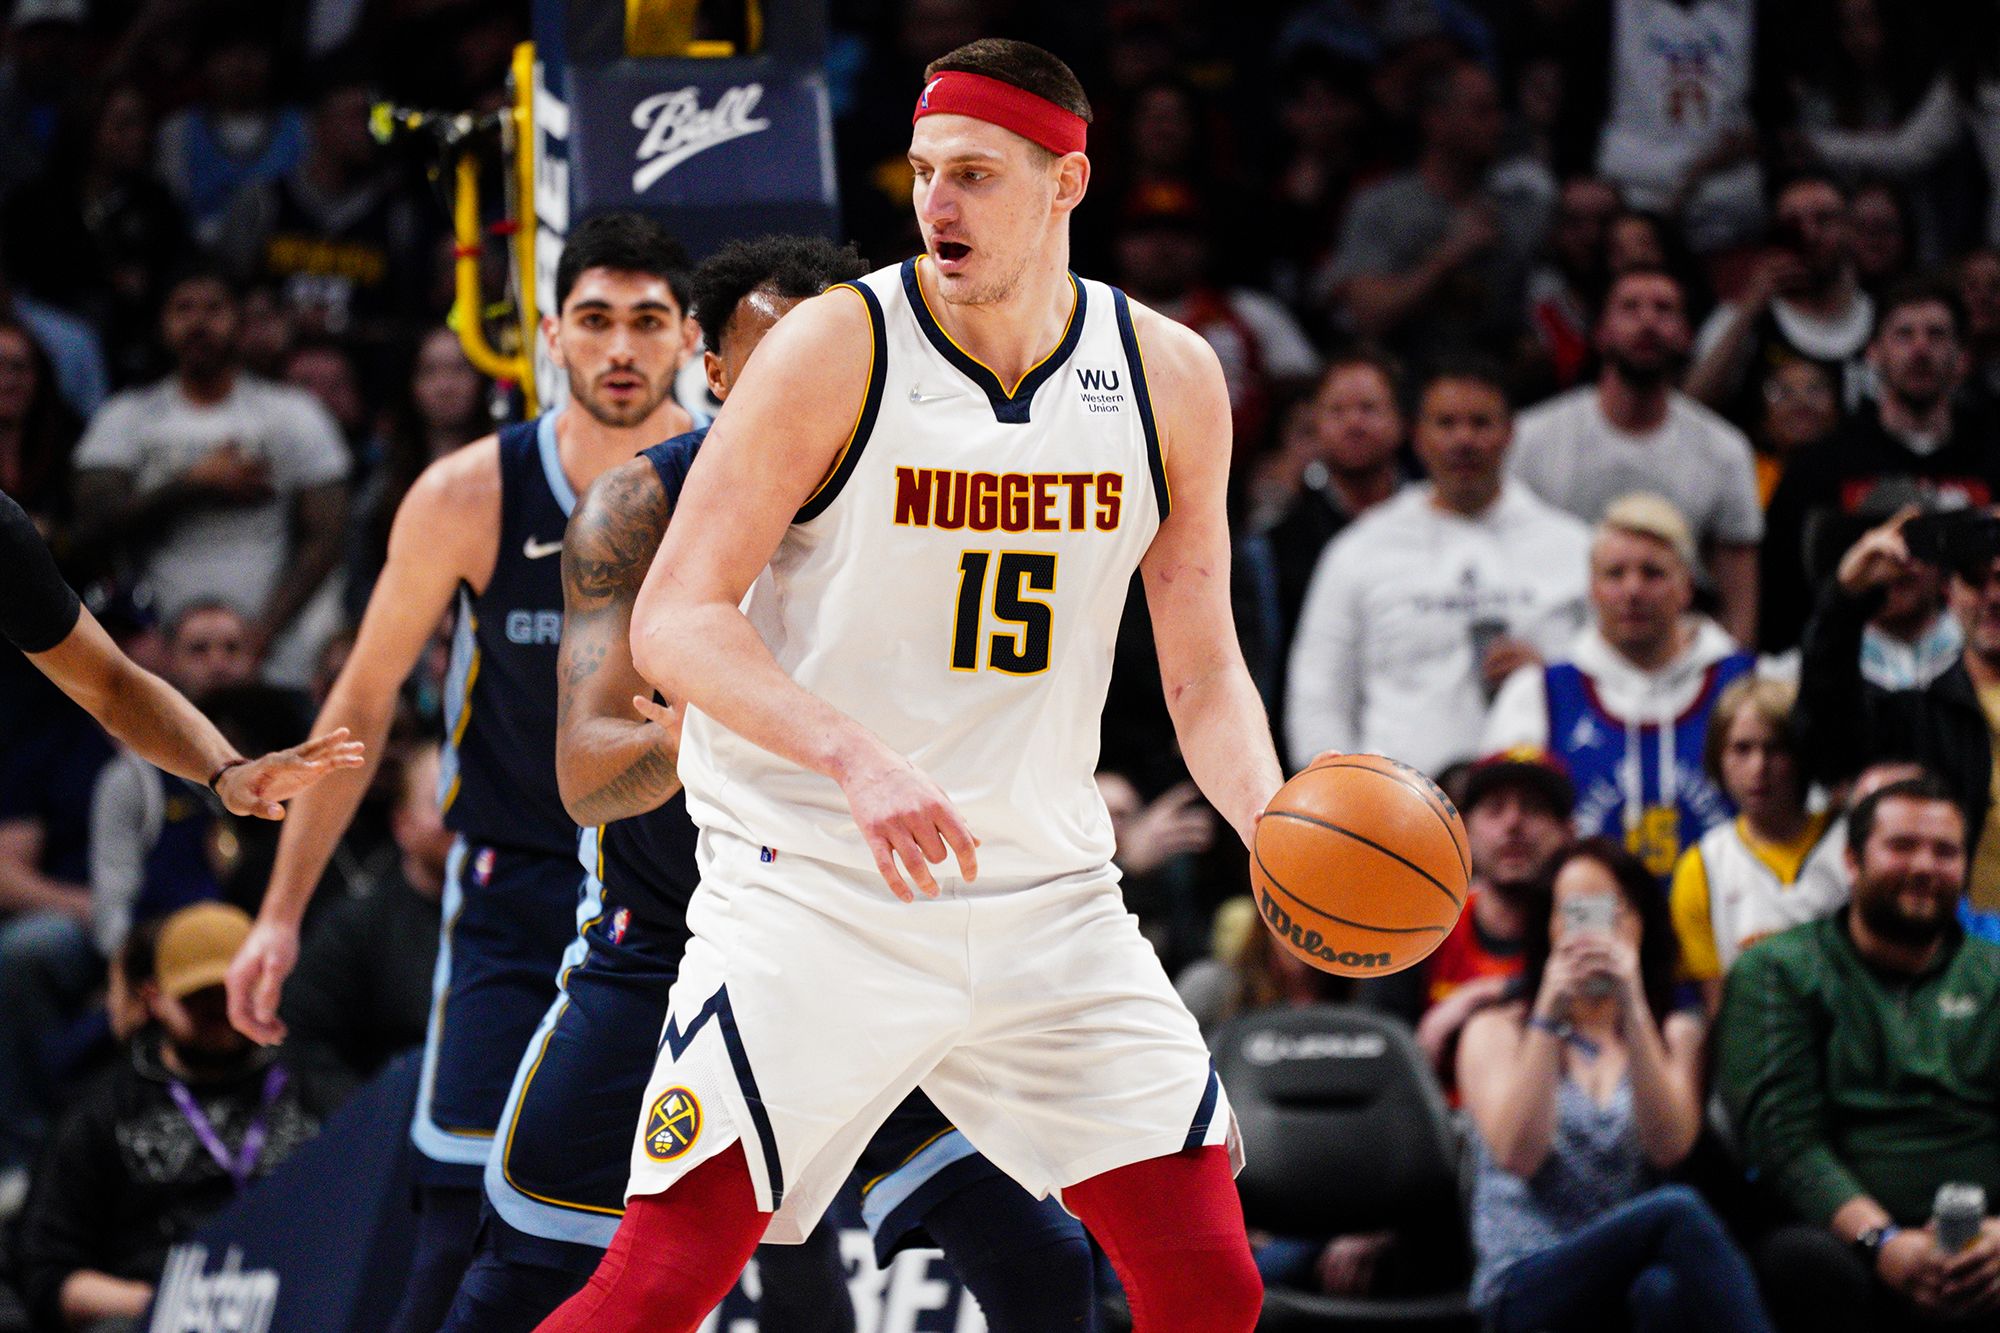 Kosmider: Pride of country powerful driving force for rising Nuggets star Nikola  Jokic – The Denver Post